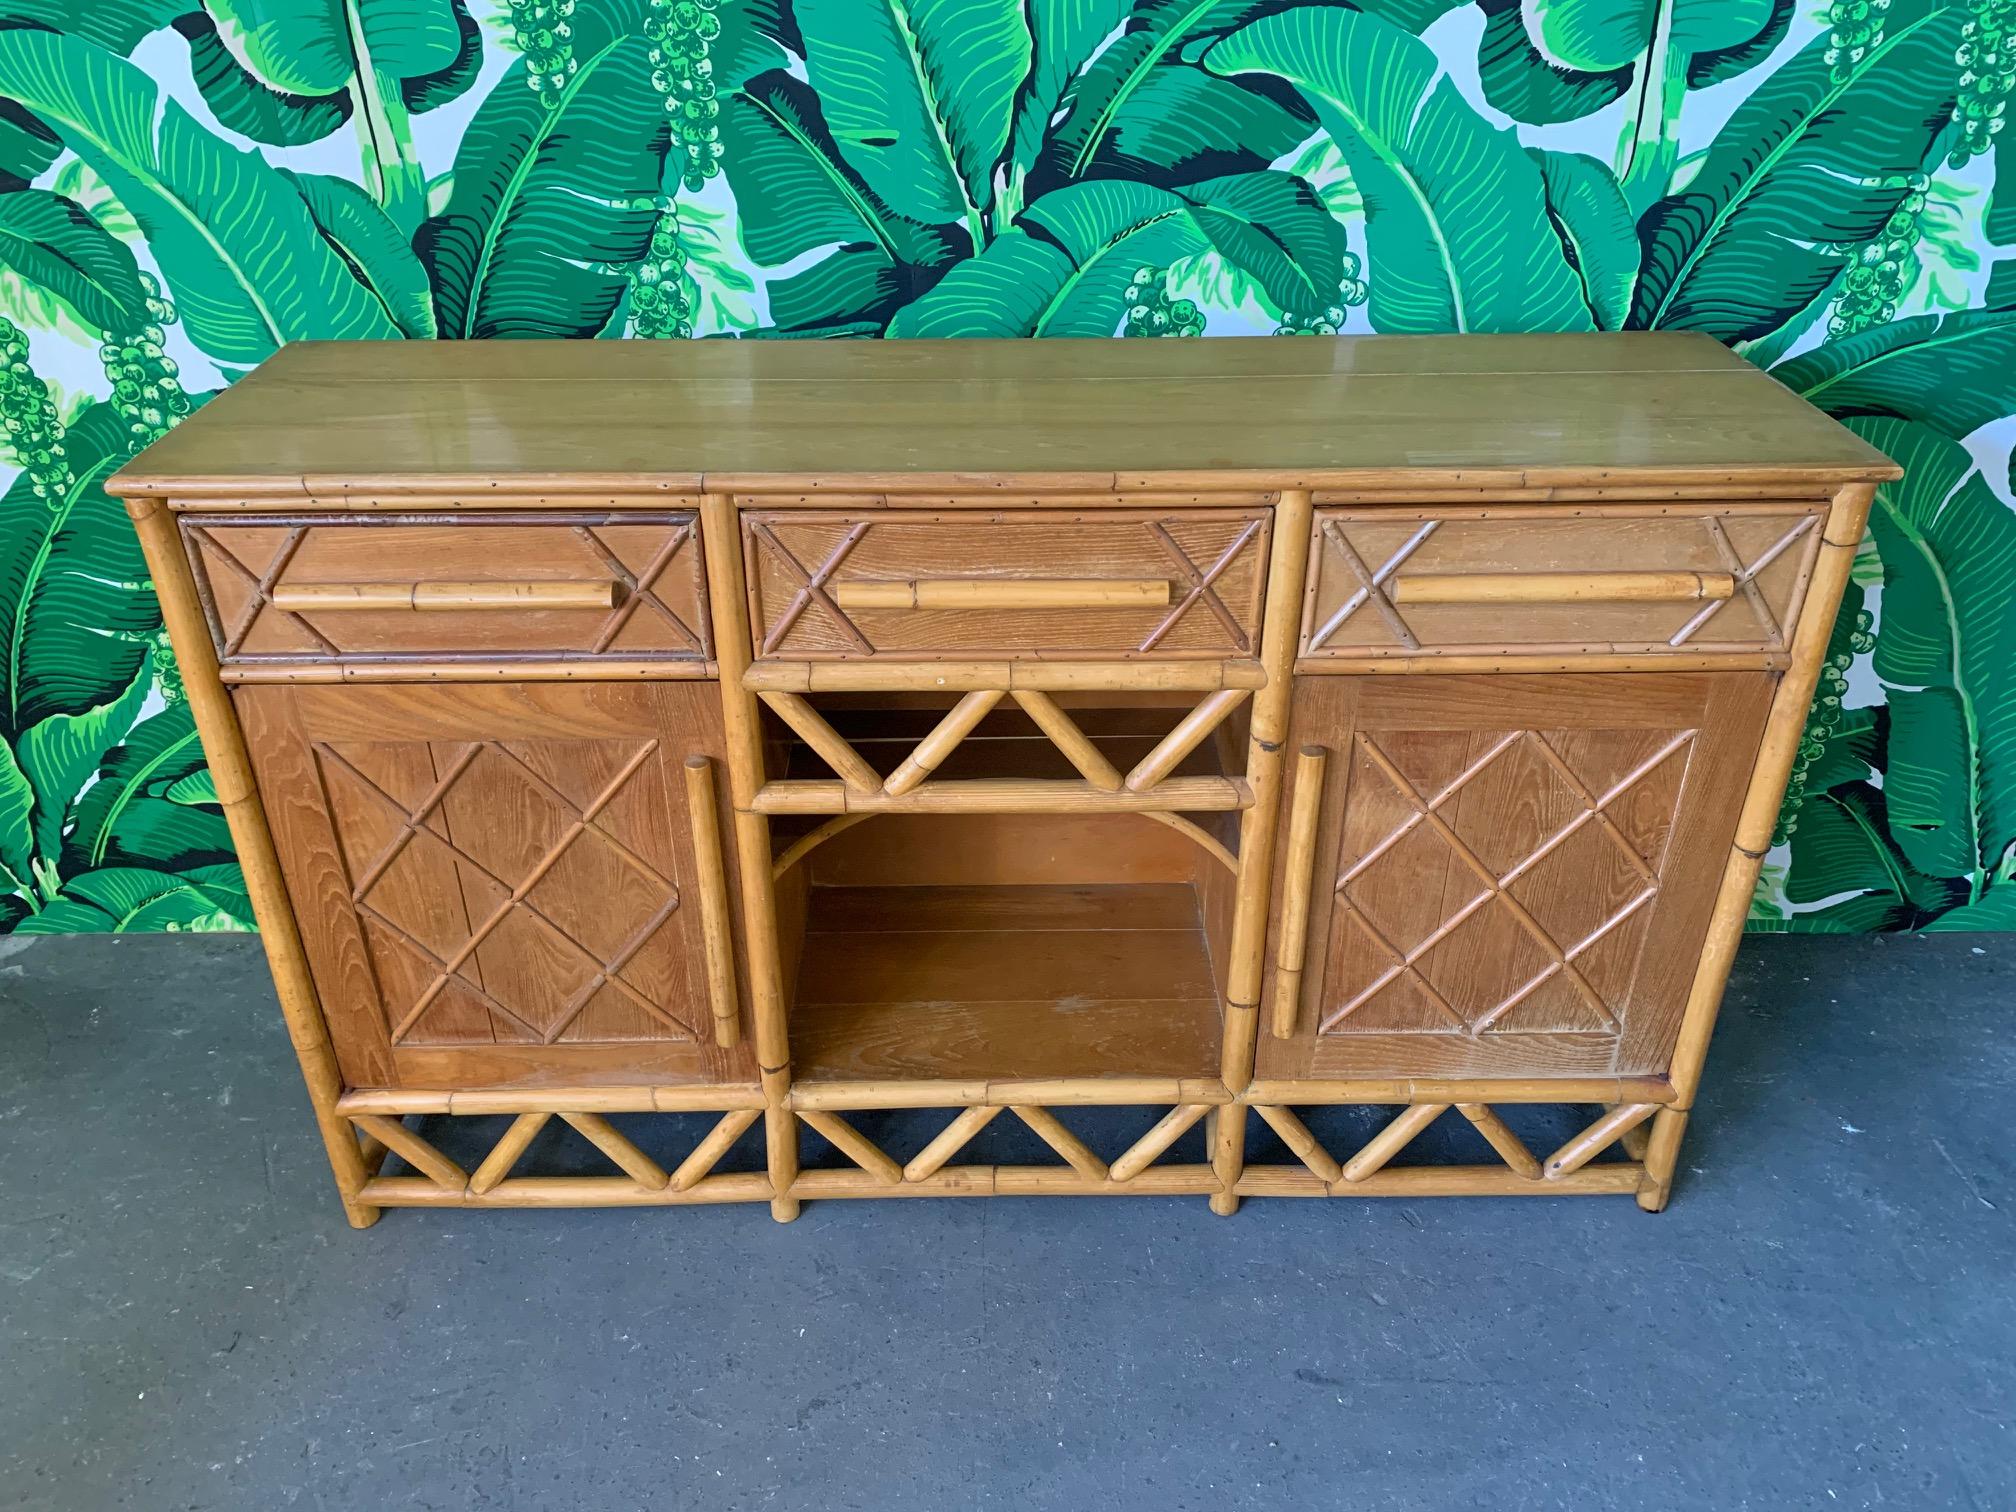 Rattan server circa 1960s features three drawers, two doors revealing shelved storage, and a unique curved center shelf. Rattan skirt and door faces in a cross hatch pattern. Good vintage condition with minor imperfections consistent with age.